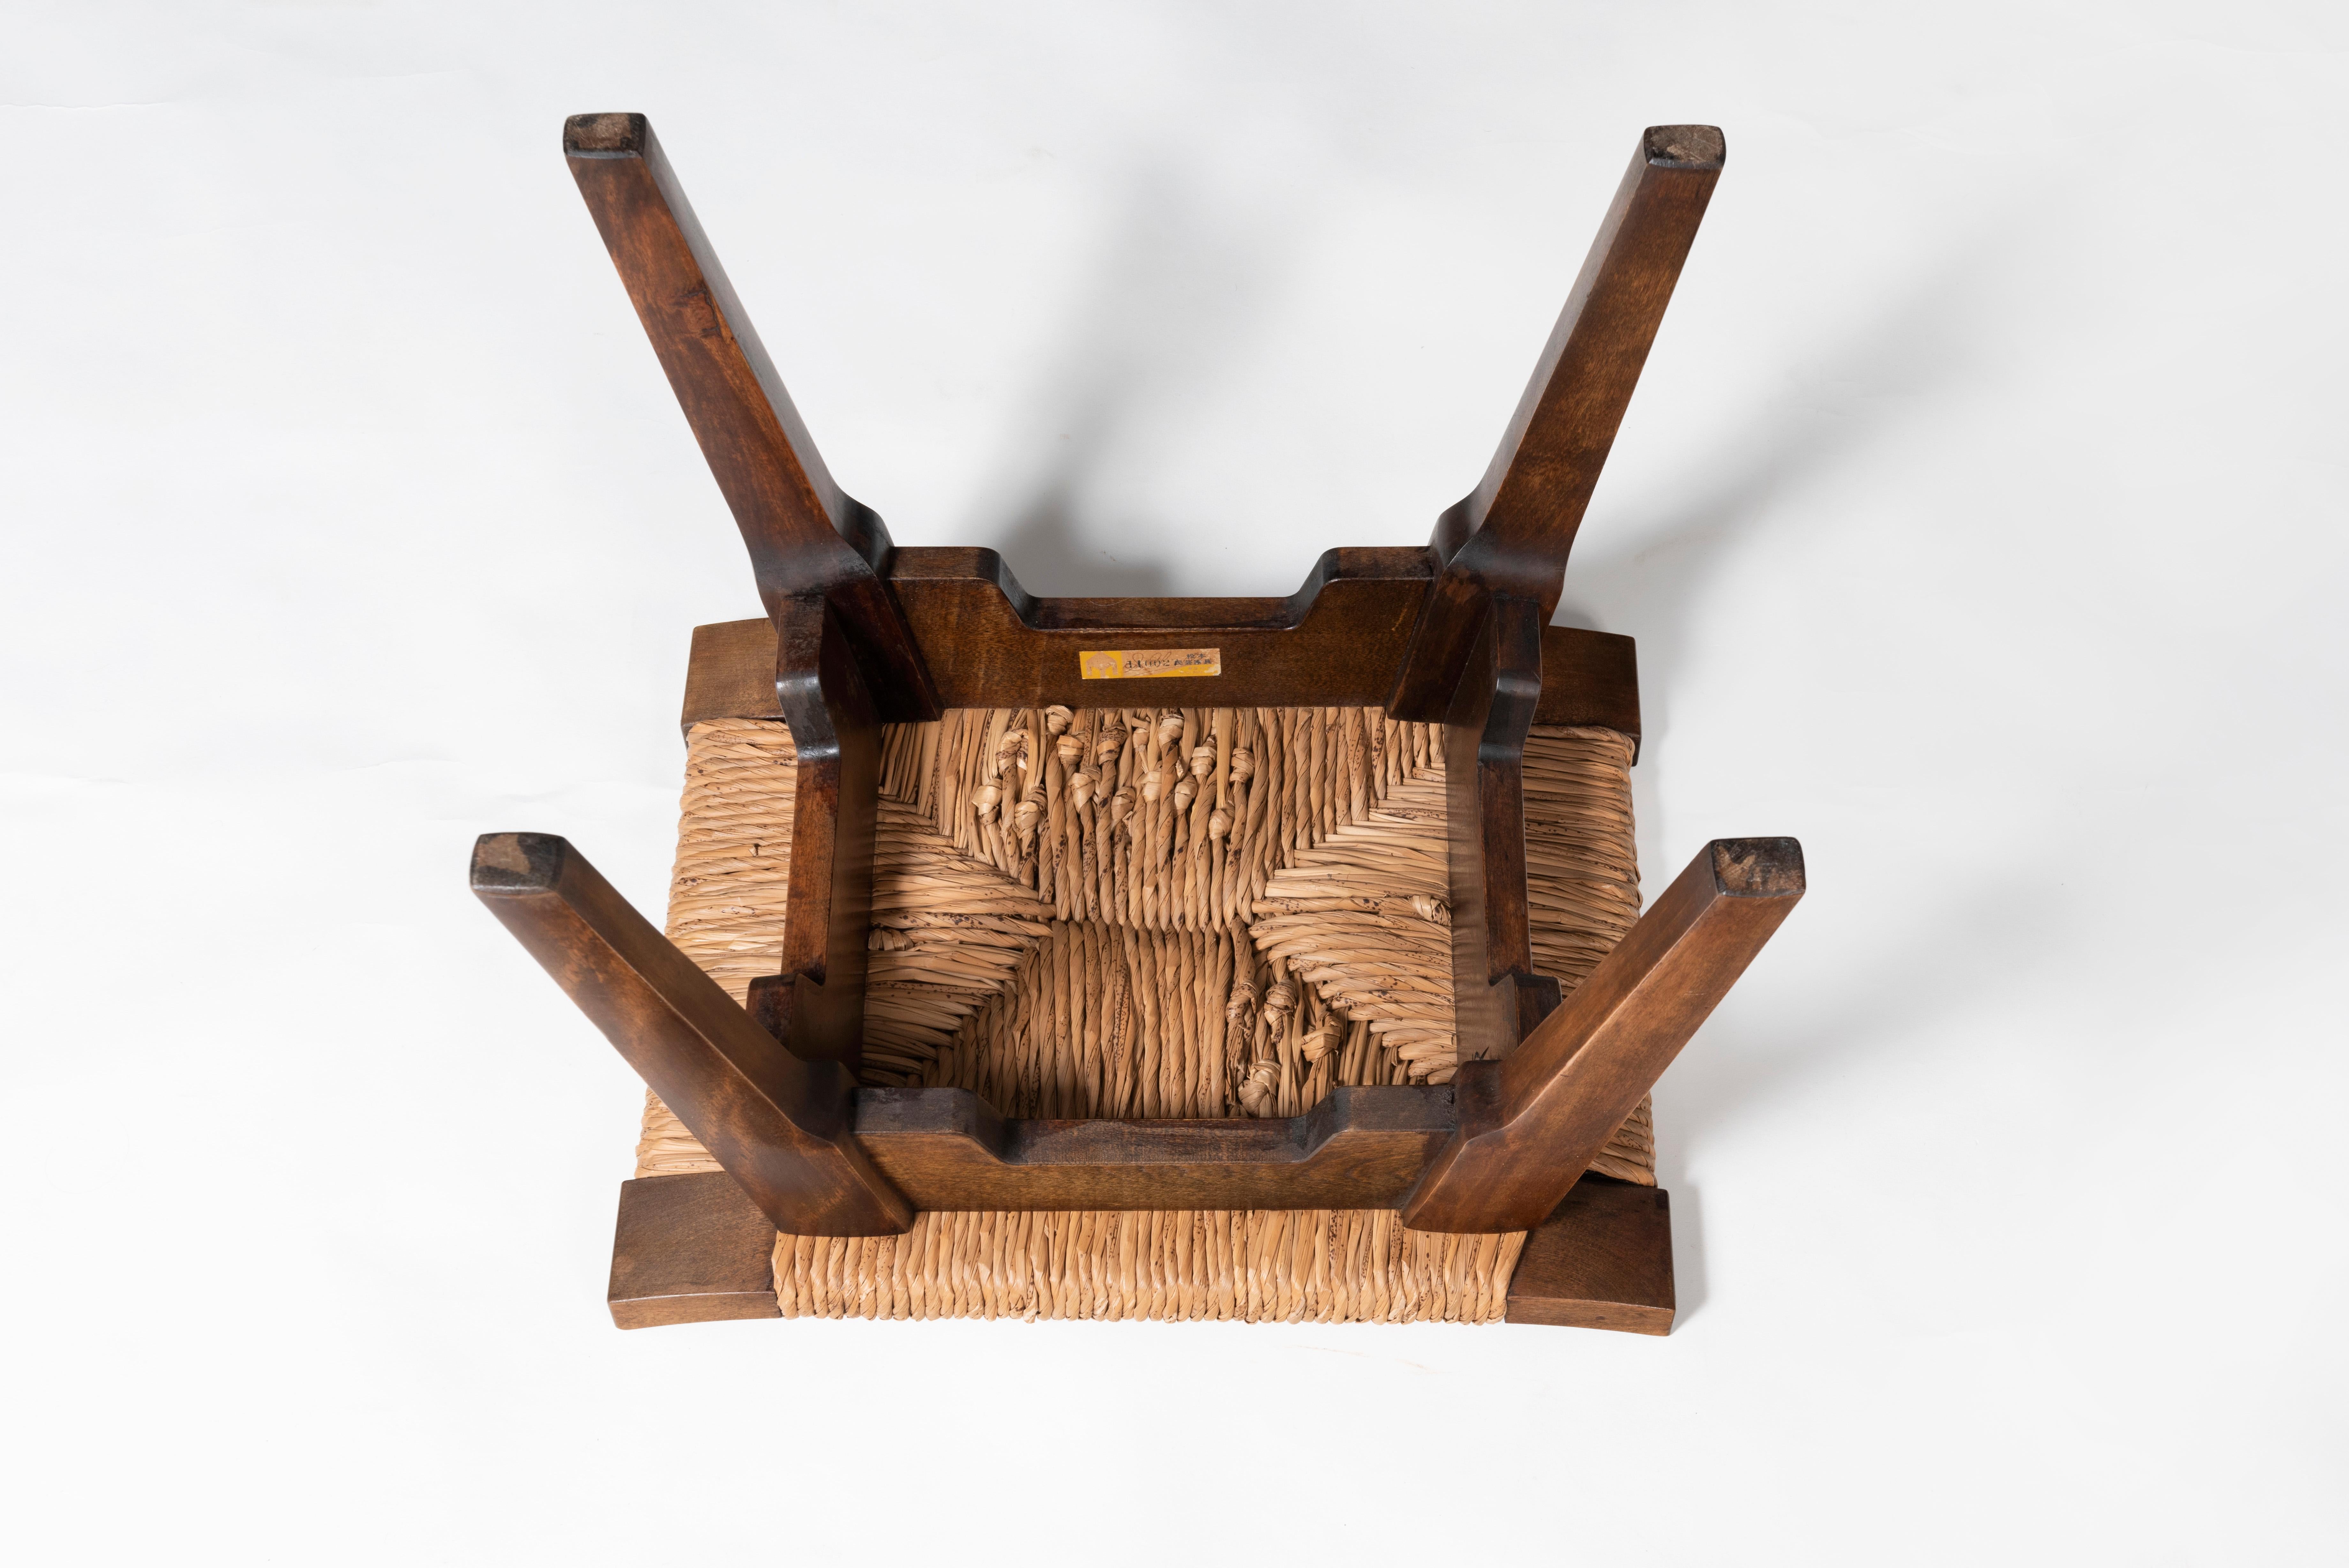 This stool was made for the In 1936, the Japanese Folk Crafts Museum. Made of Japanese cherry wood and seagrass. Today, you can still see the original benches made for this museum. 
Yanagi Soetsu (1889 – 1961), also known as Yanagi Muneyoshi, was a